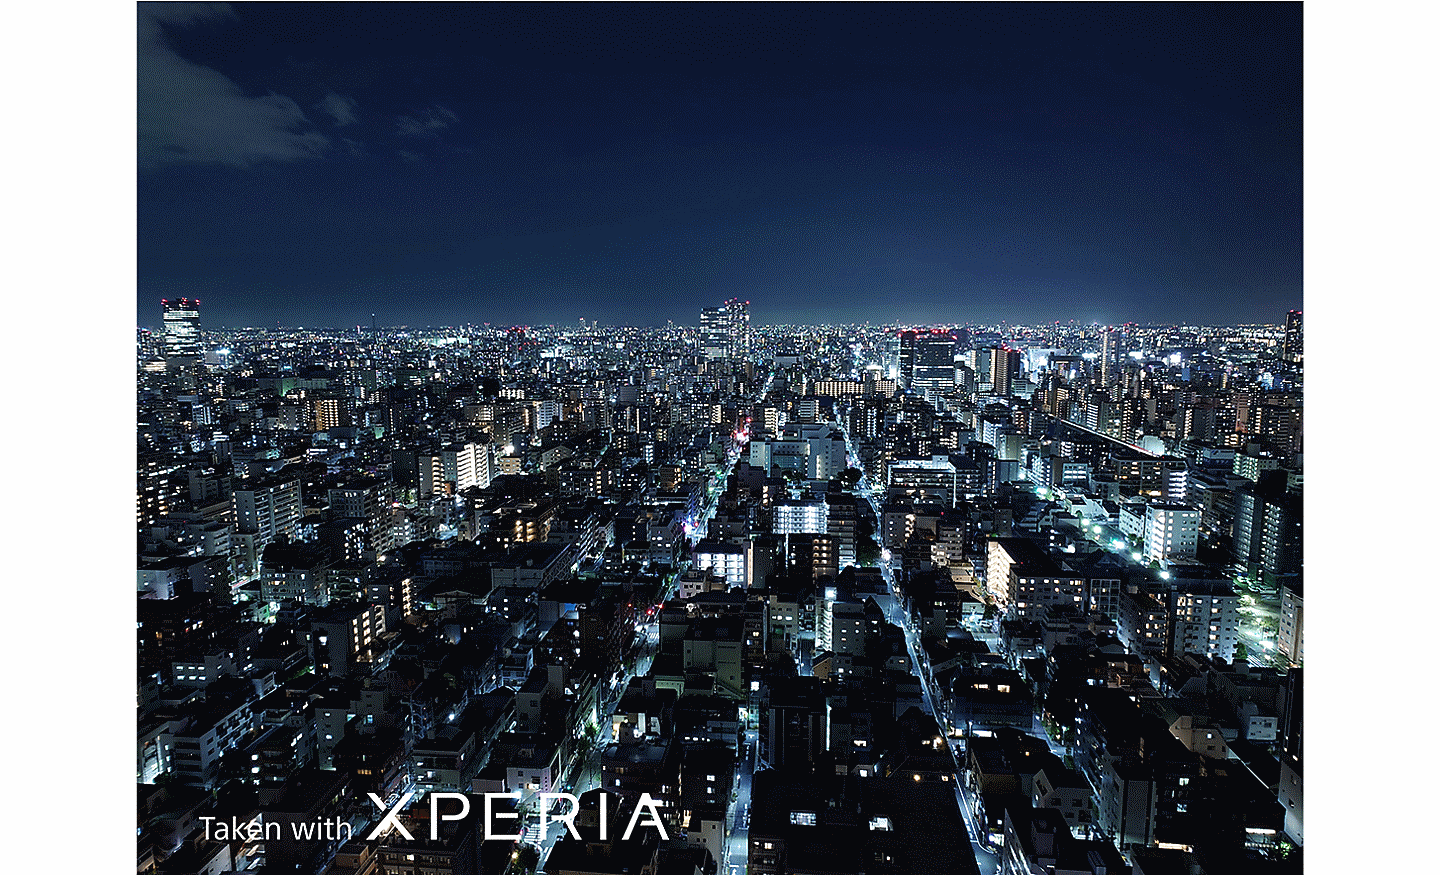 Vast cityscape at night, shot from above. Text on image reads "Taken with XPERIA".